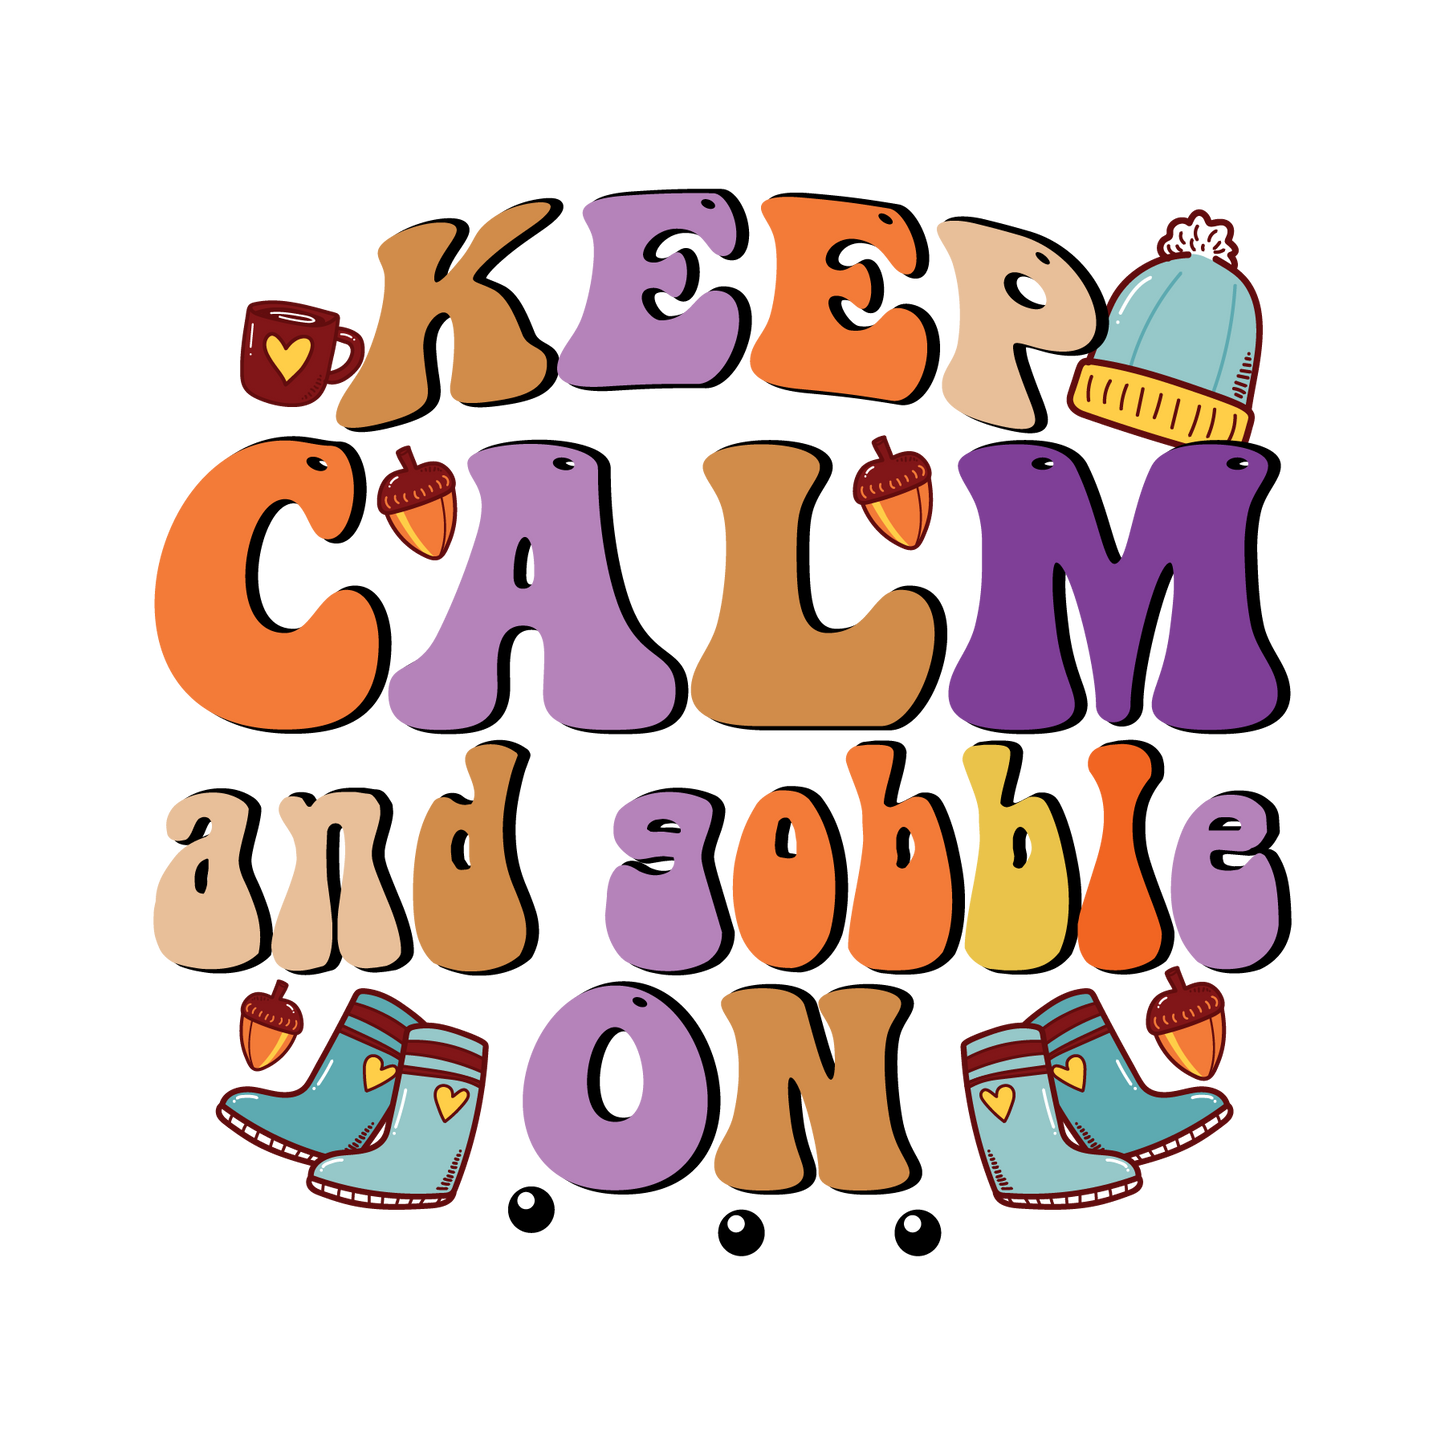 Keep Calm and Gobble On Design Transfer